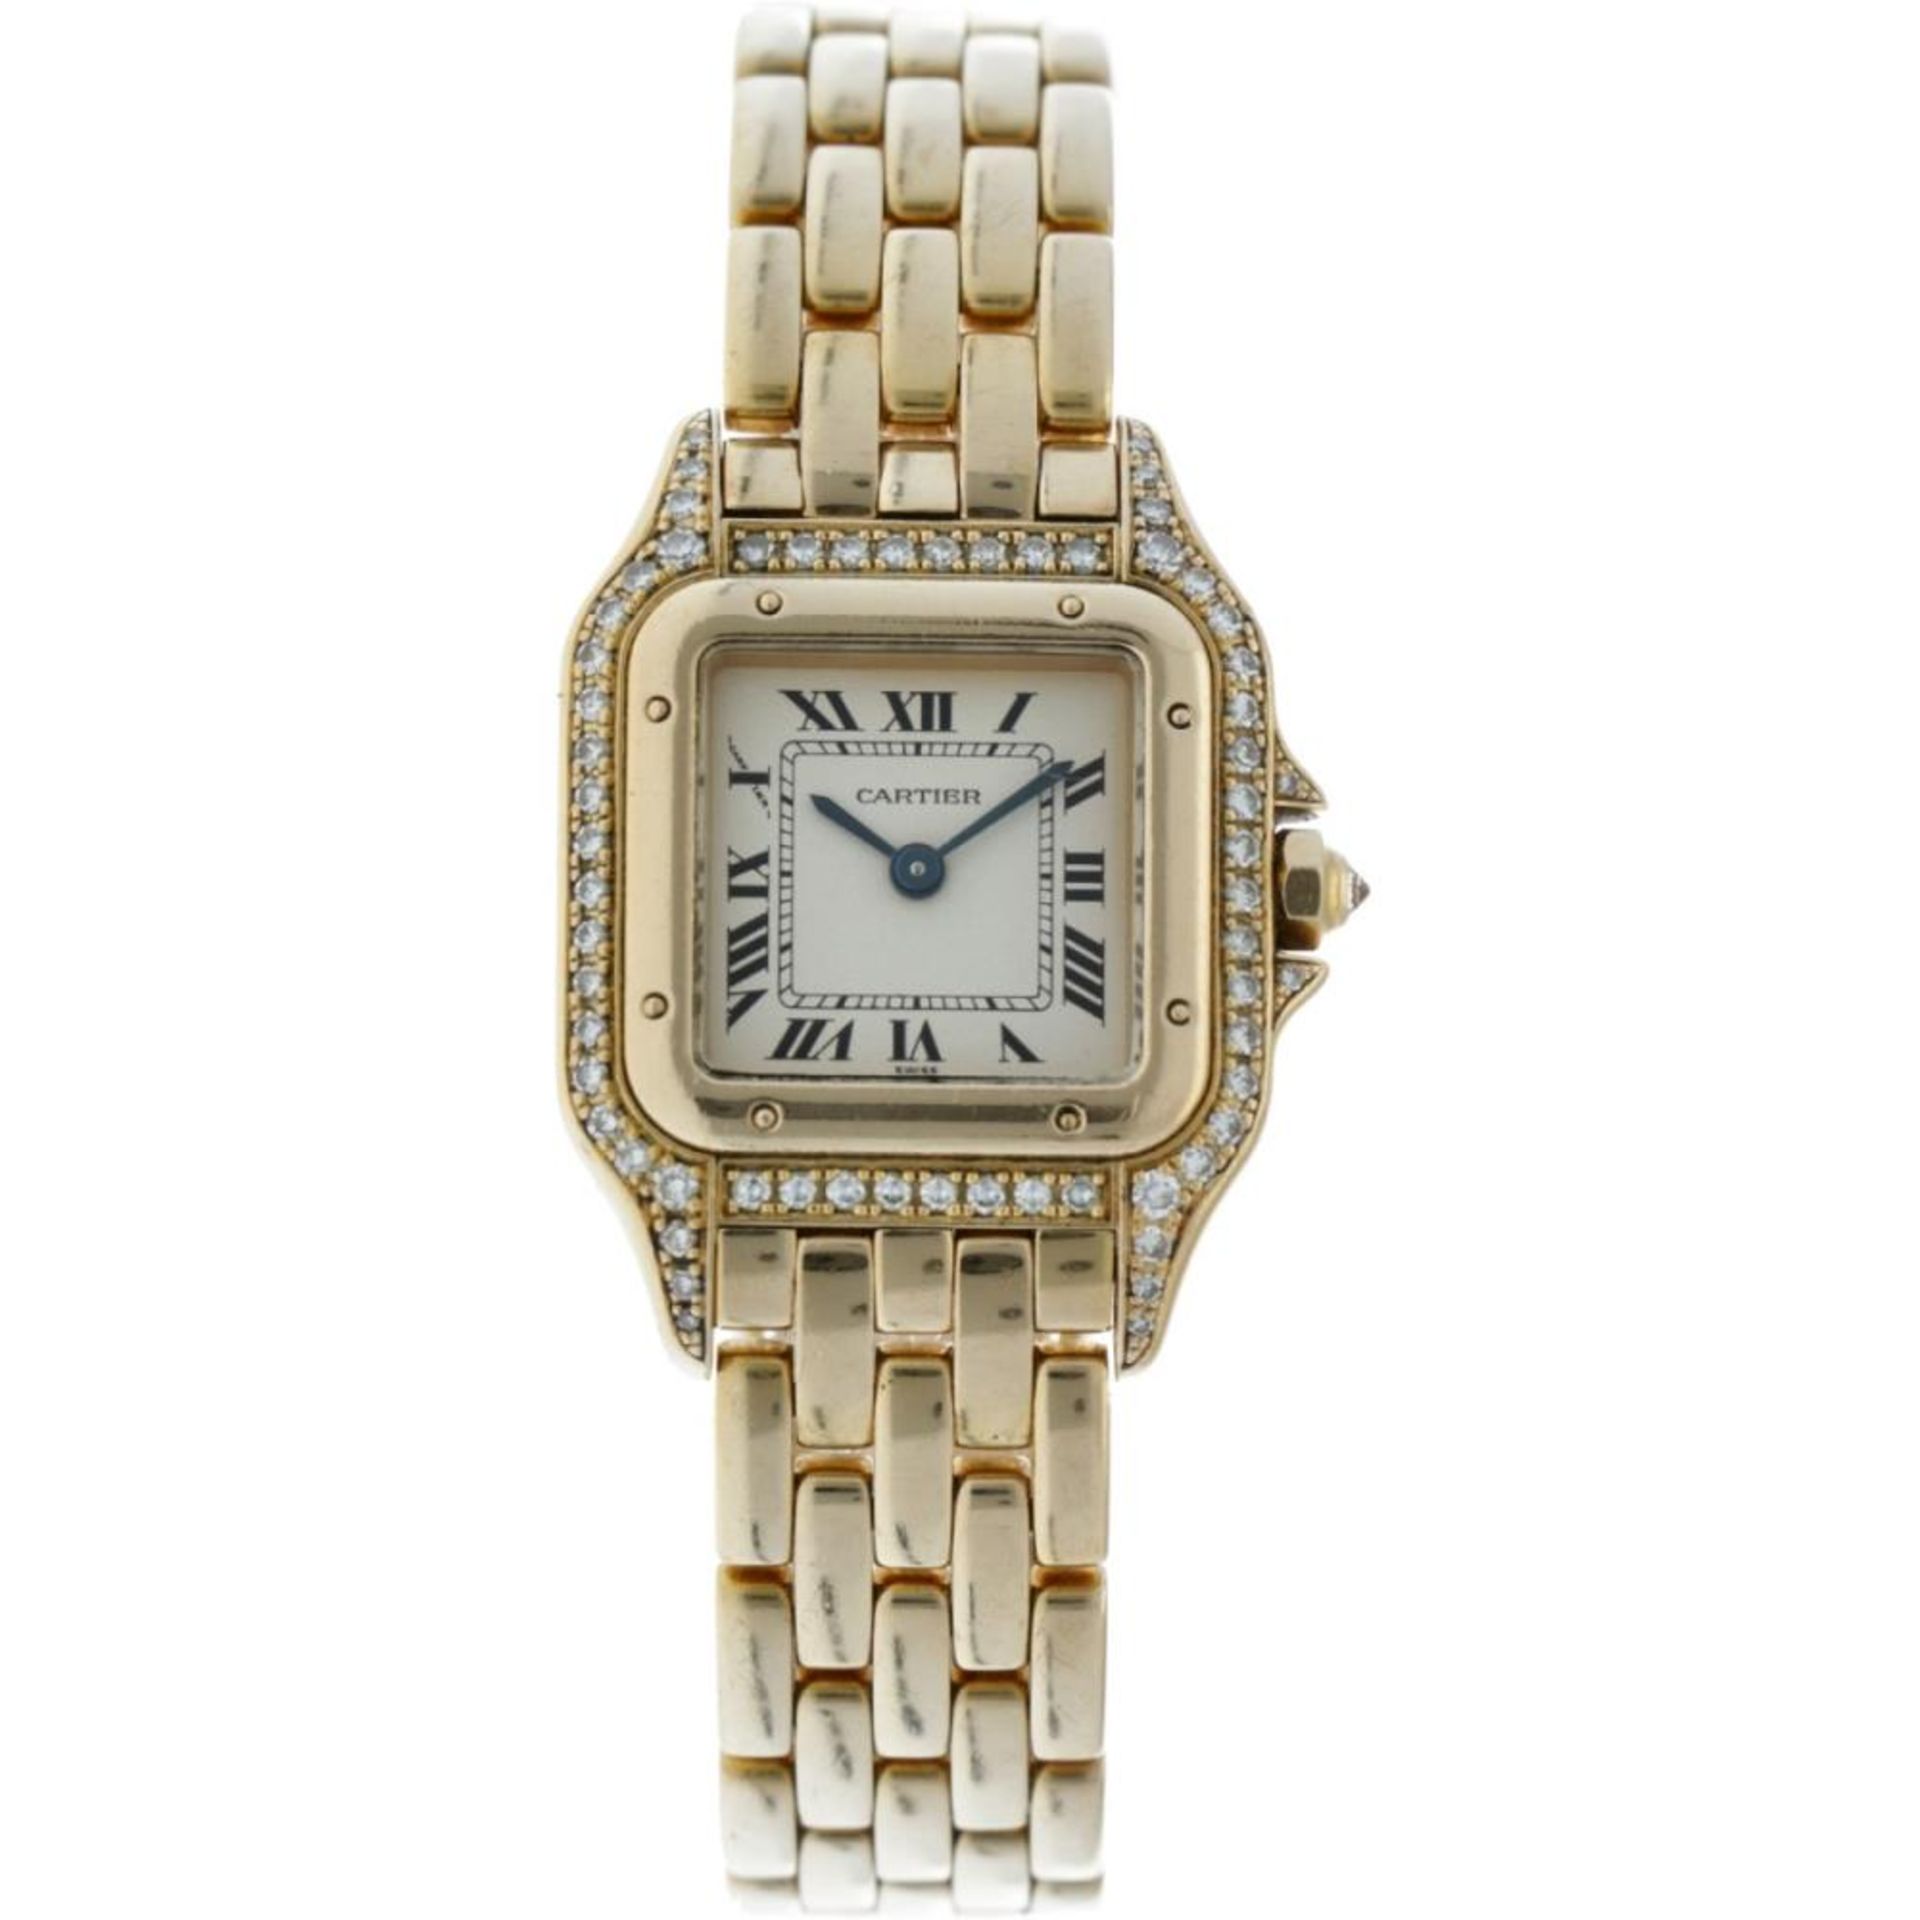 Cartier Panthere 1280 - Ladies watch - approx. 1995. - Image 2 of 10